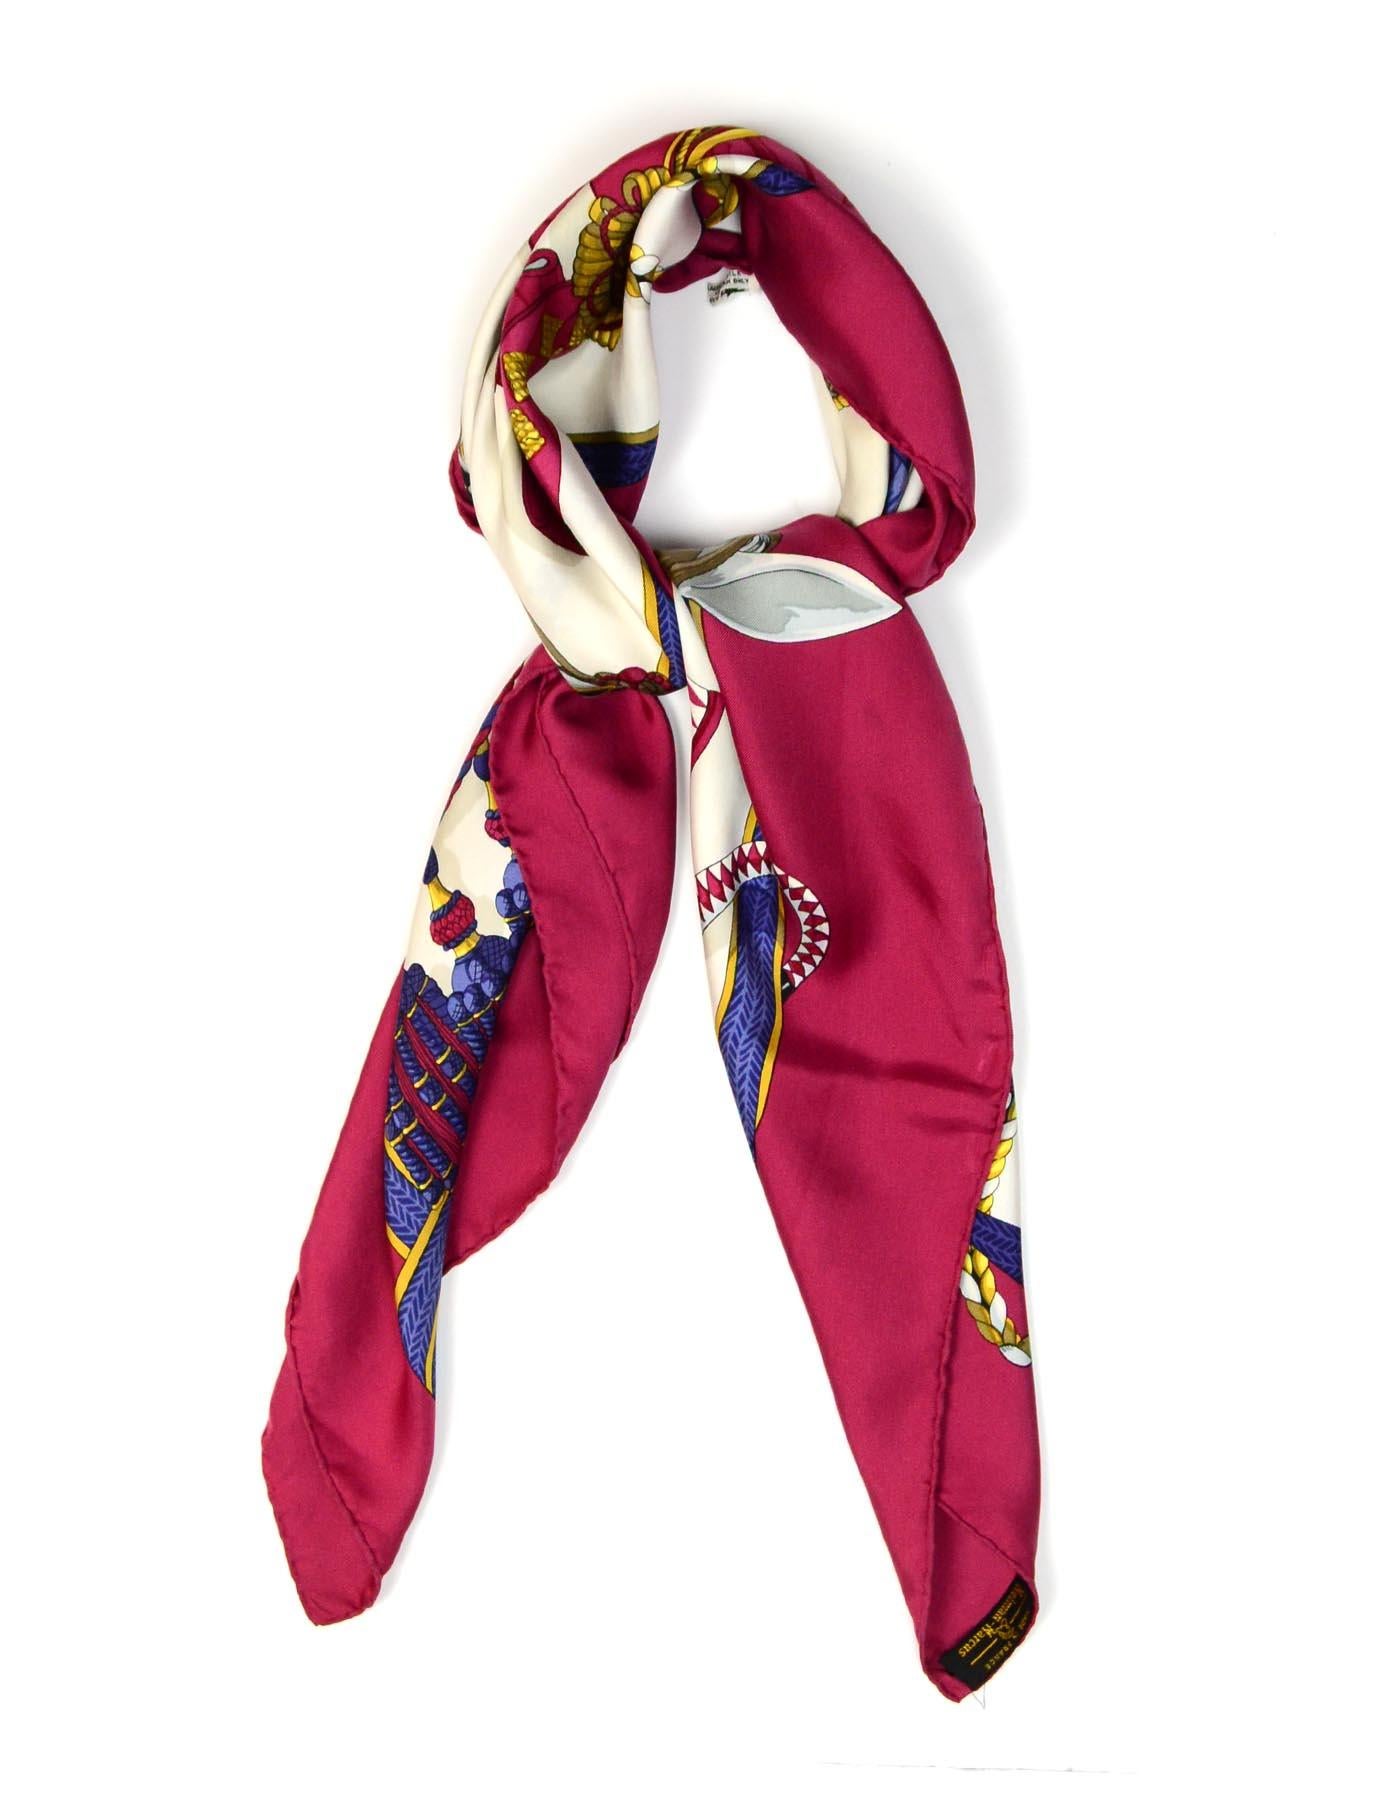 Hermes Burgundy Frontaux Et Cocardes Horse 90cm Silk Scarf

Made In:  France
Color: Burgundy and printed
Materials: 100% silk
Overall Condition: Good pre-owned condition with exception of some staining/discoloration 
Estimated Retail: $395 +